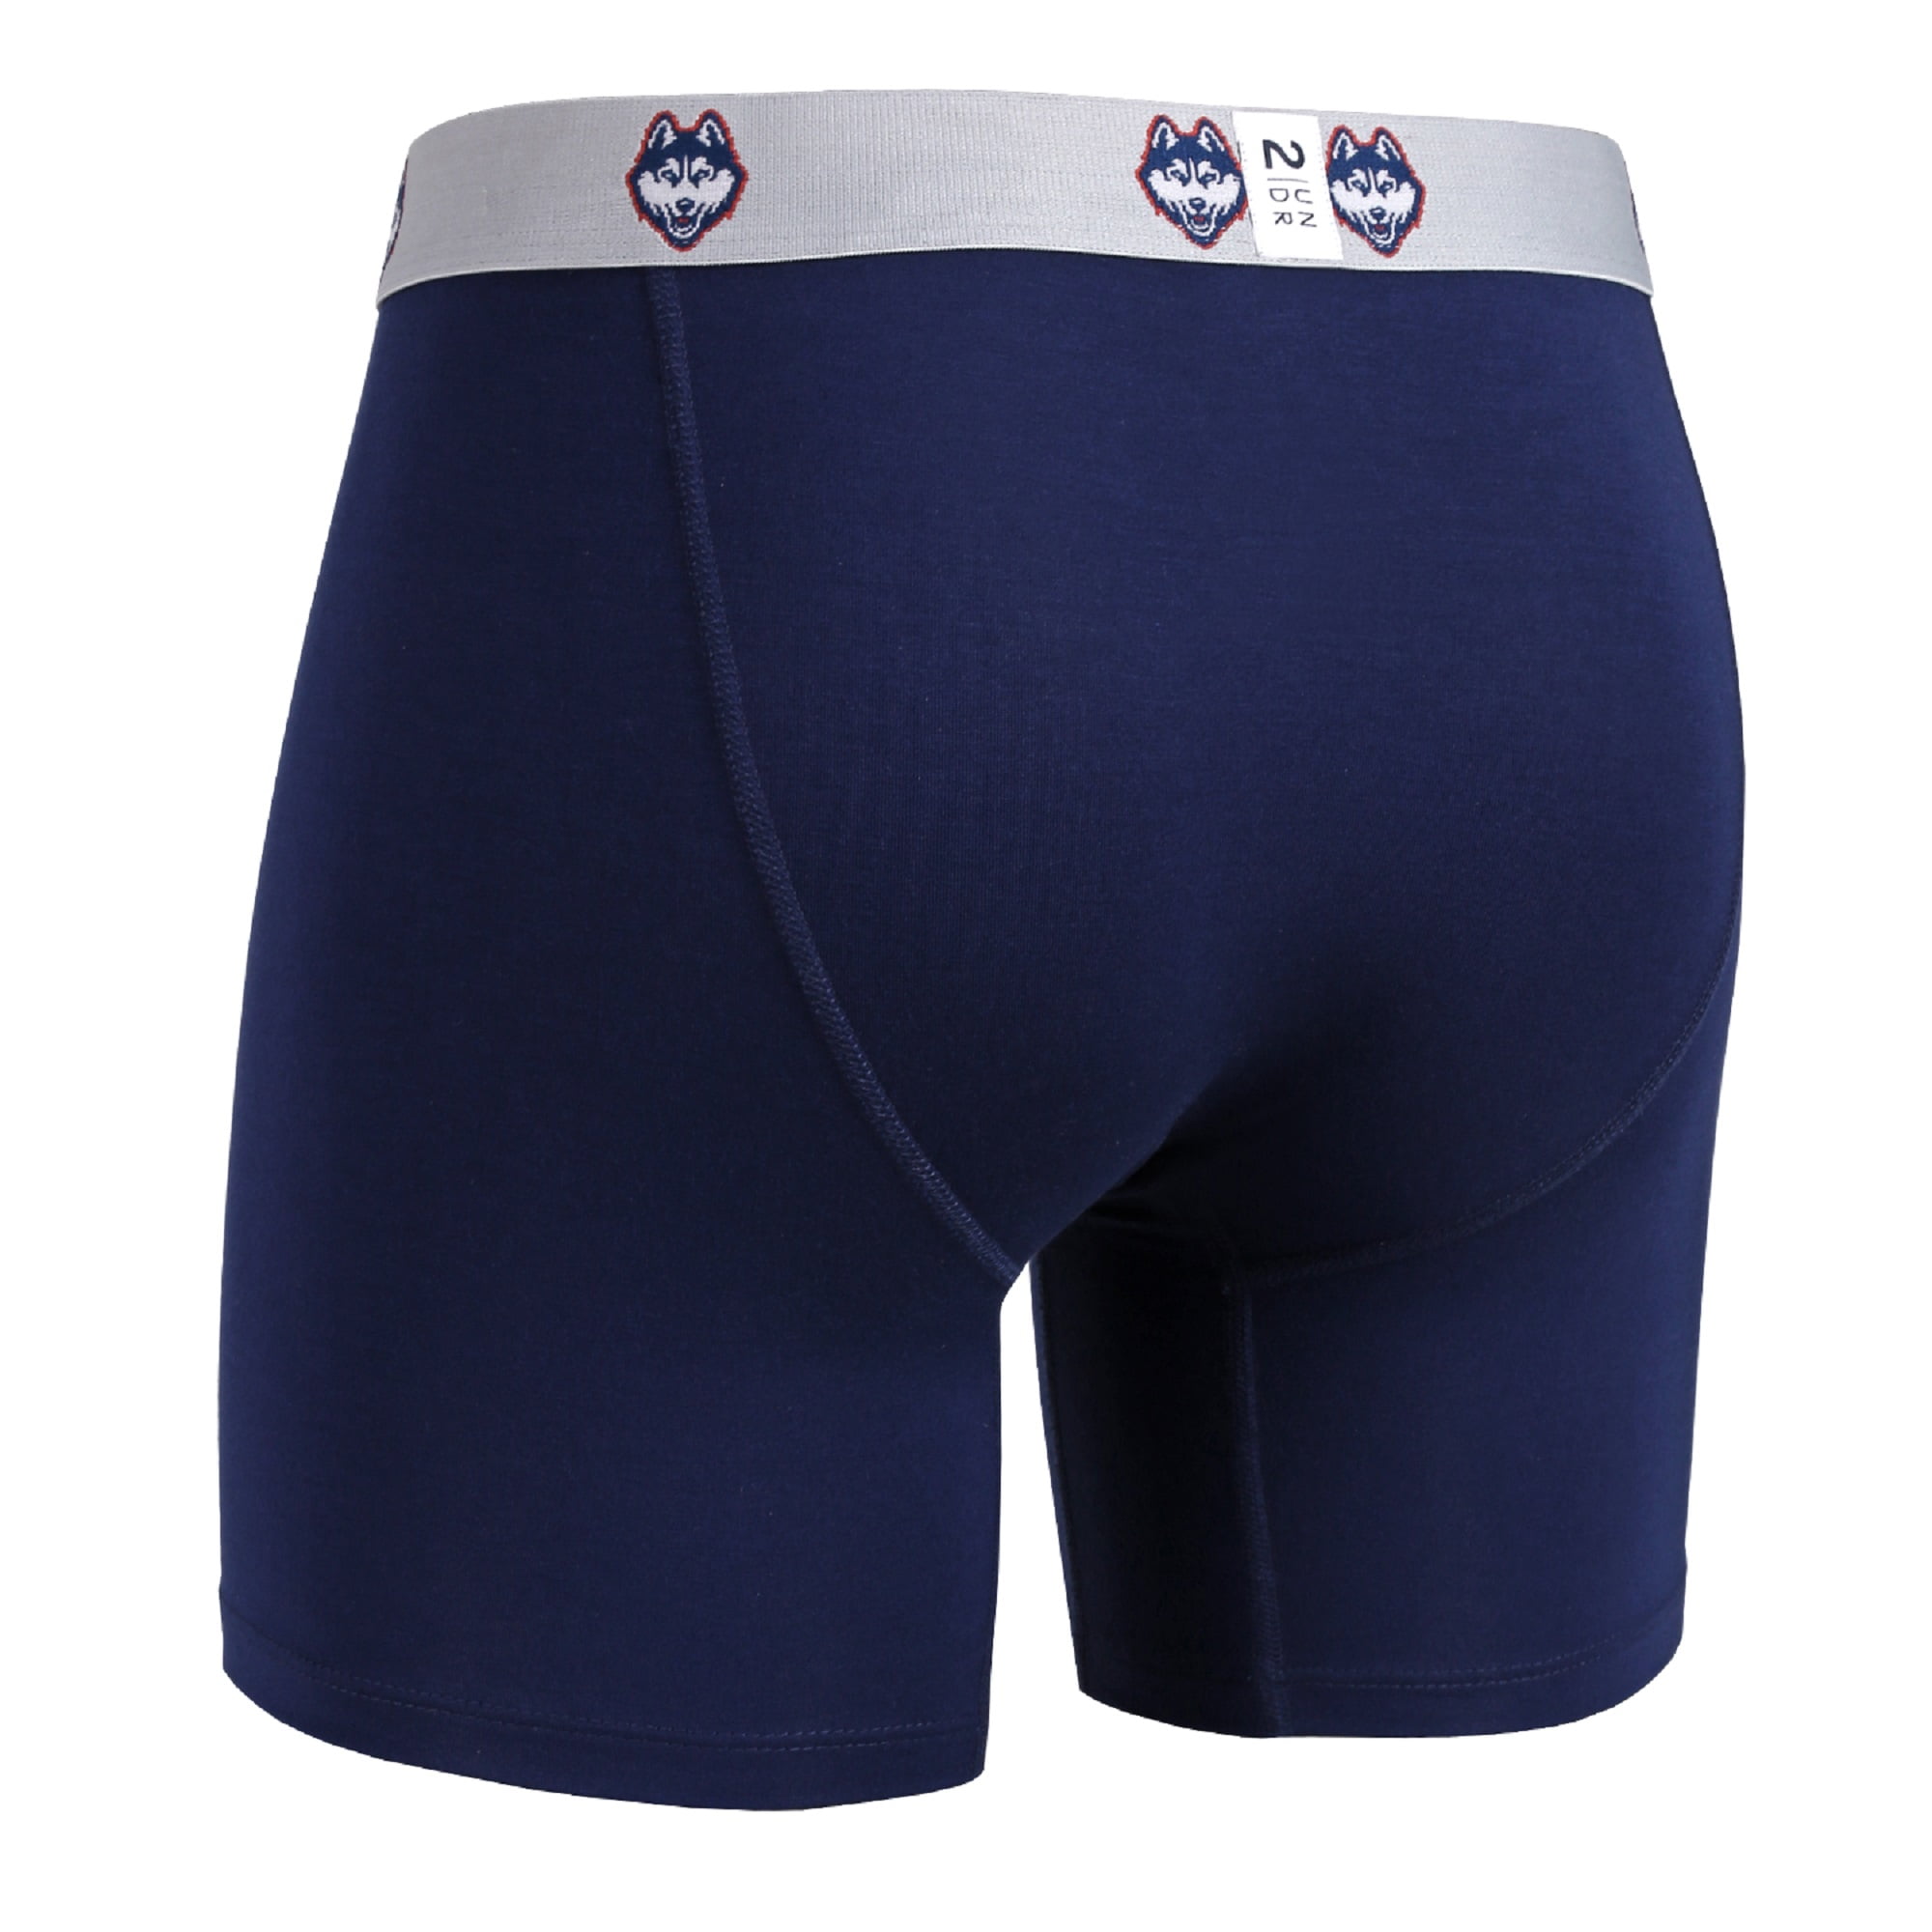 2UNDR NCAA Team Colors Men's Swing Shift Boxers (Connecticut Navy, Small) 